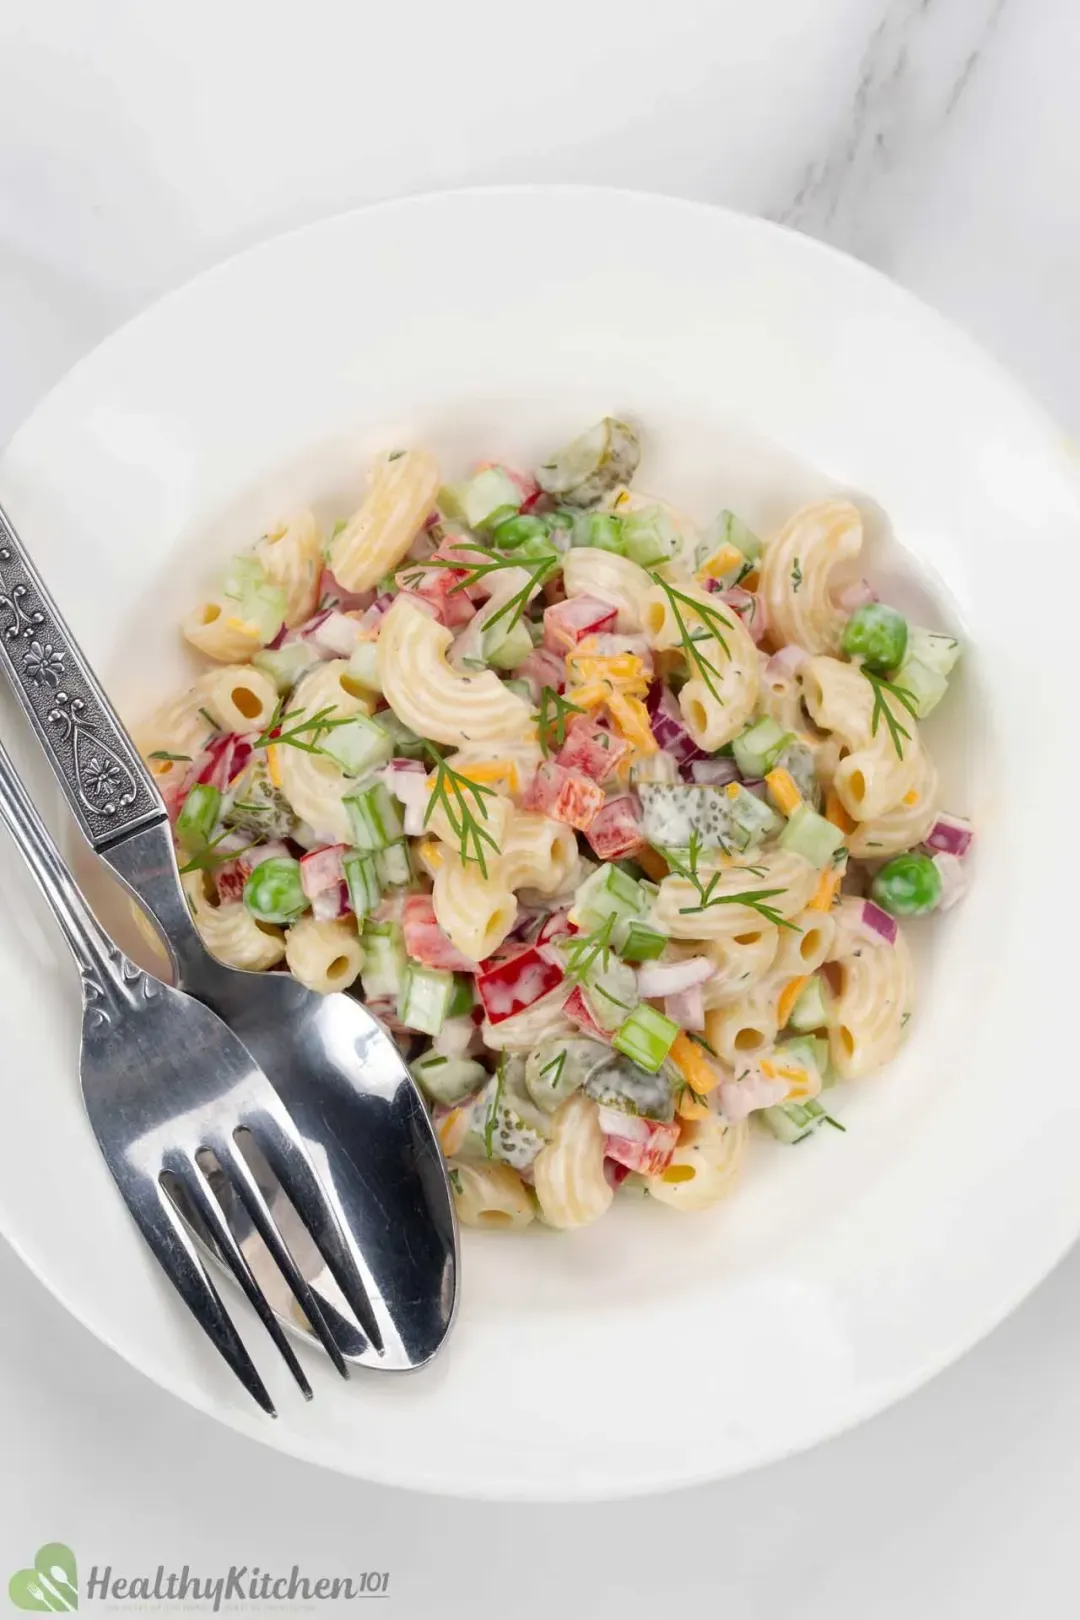 A bowl of macaroni salad with diced vegetables and dressing.